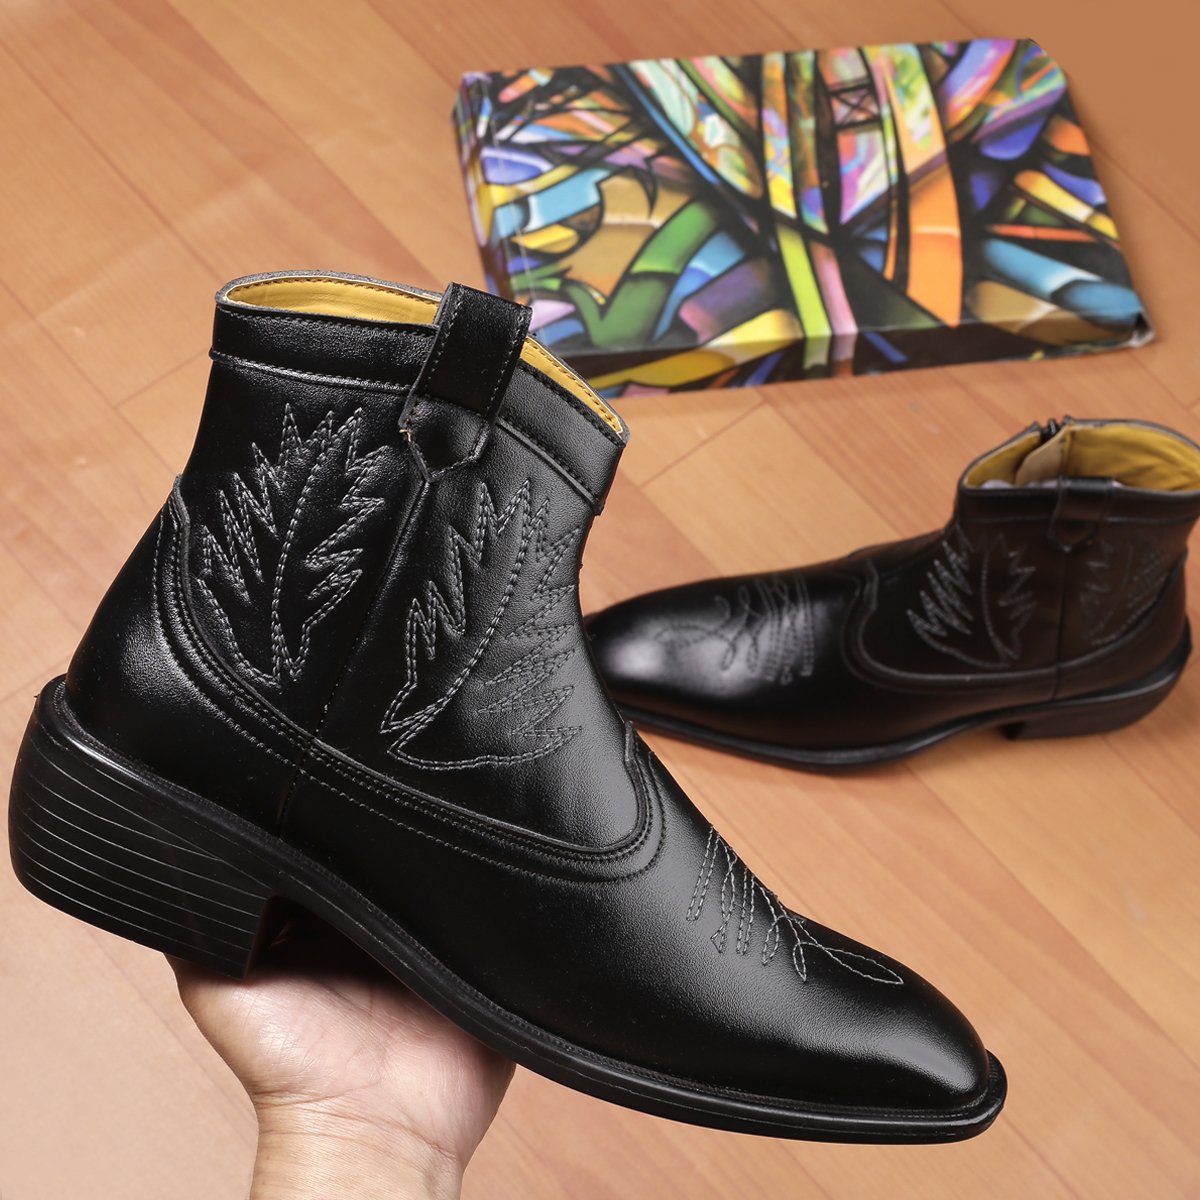 Jack Marc Men's Formal and Casual Retro Black Boots